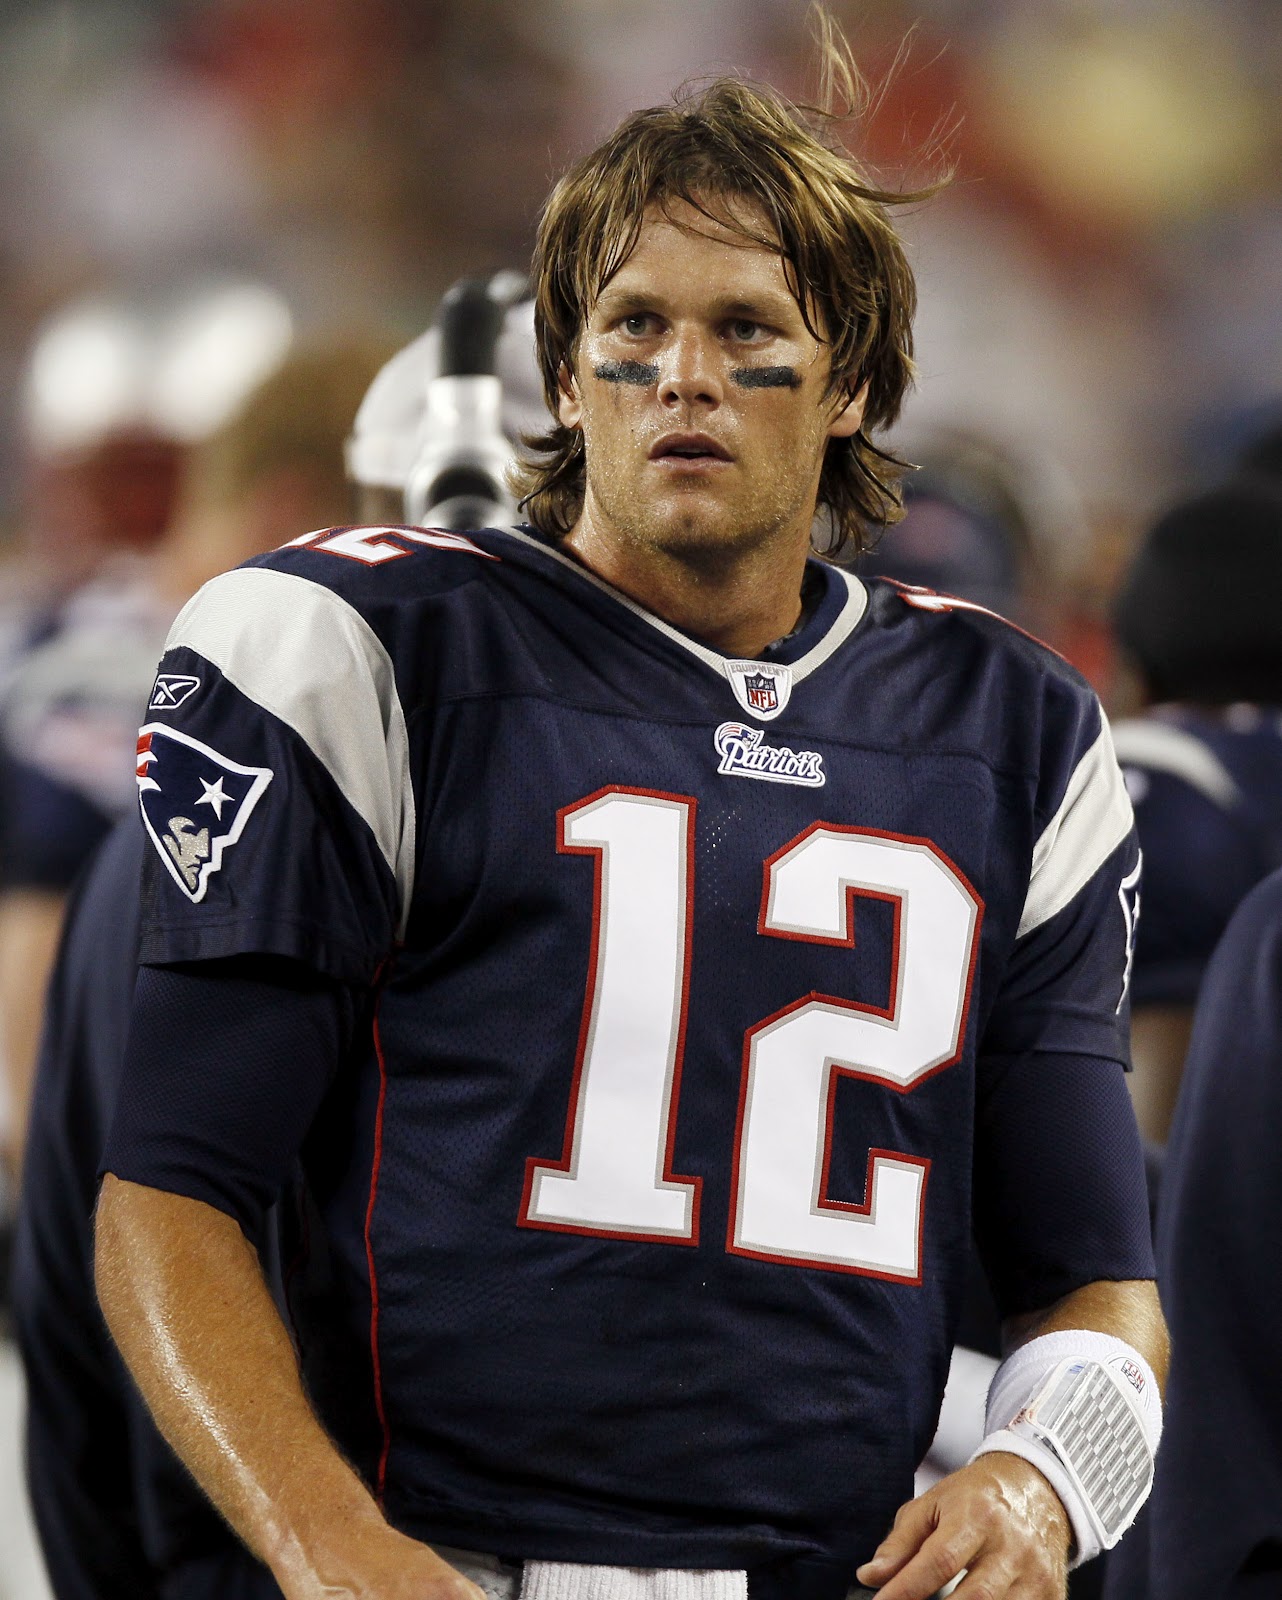 Tom Brady Profile And Image-Pictures | All Sports Players1282 x 1600